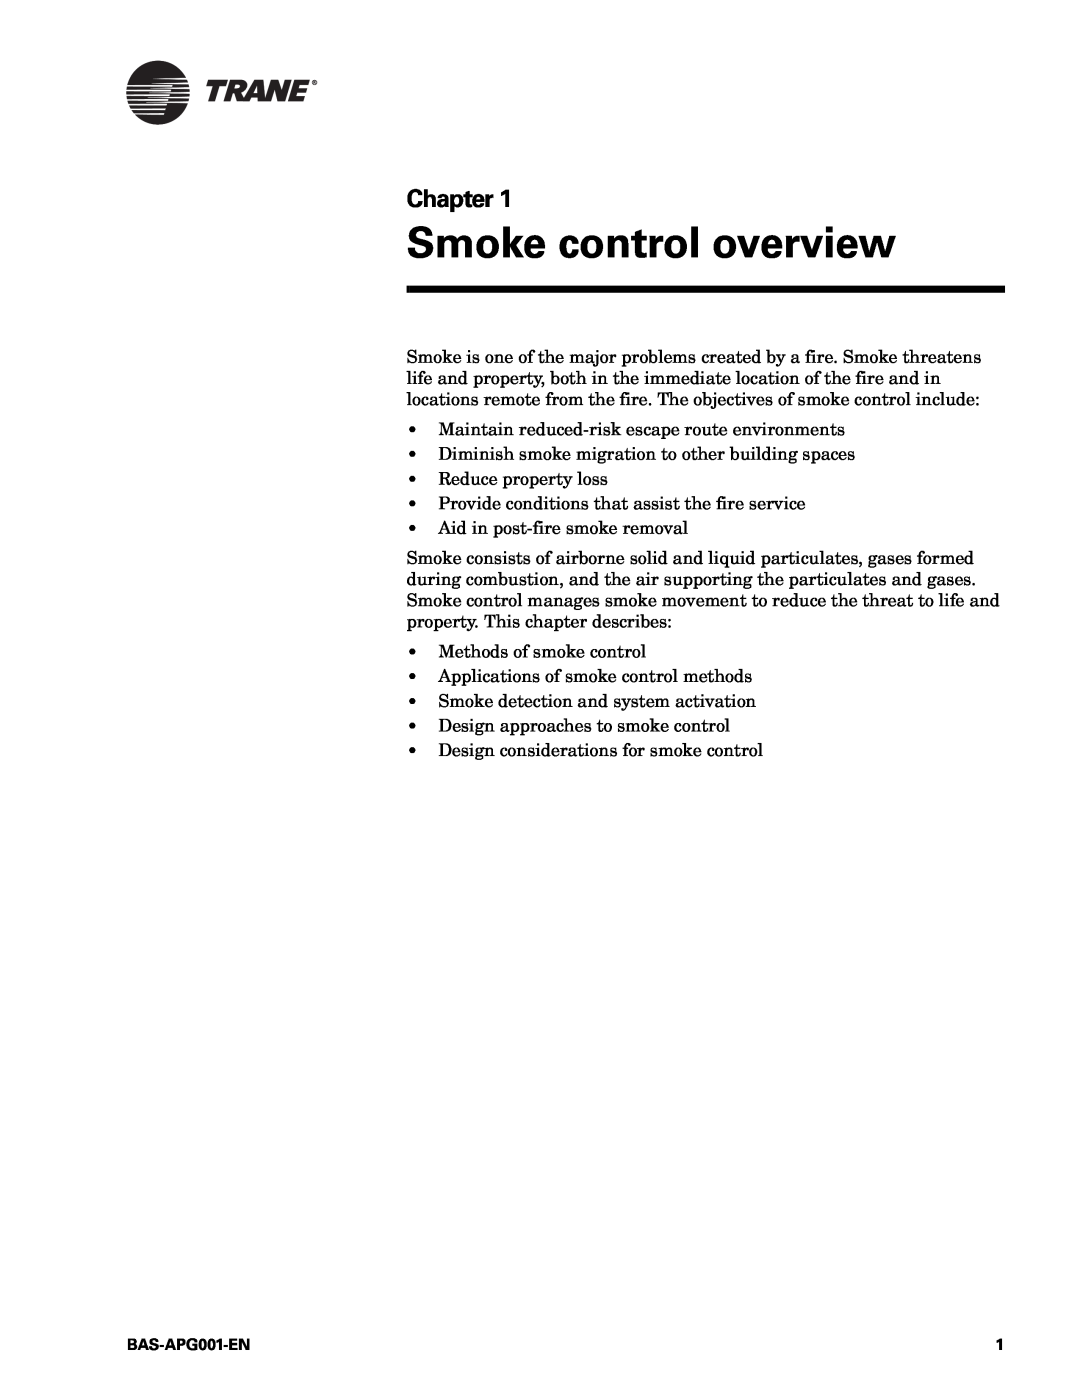 Trane Engineered Smoke Control System for Tracer Summit, BAS-APG001-EN manual Smoke control overview, Chapter 